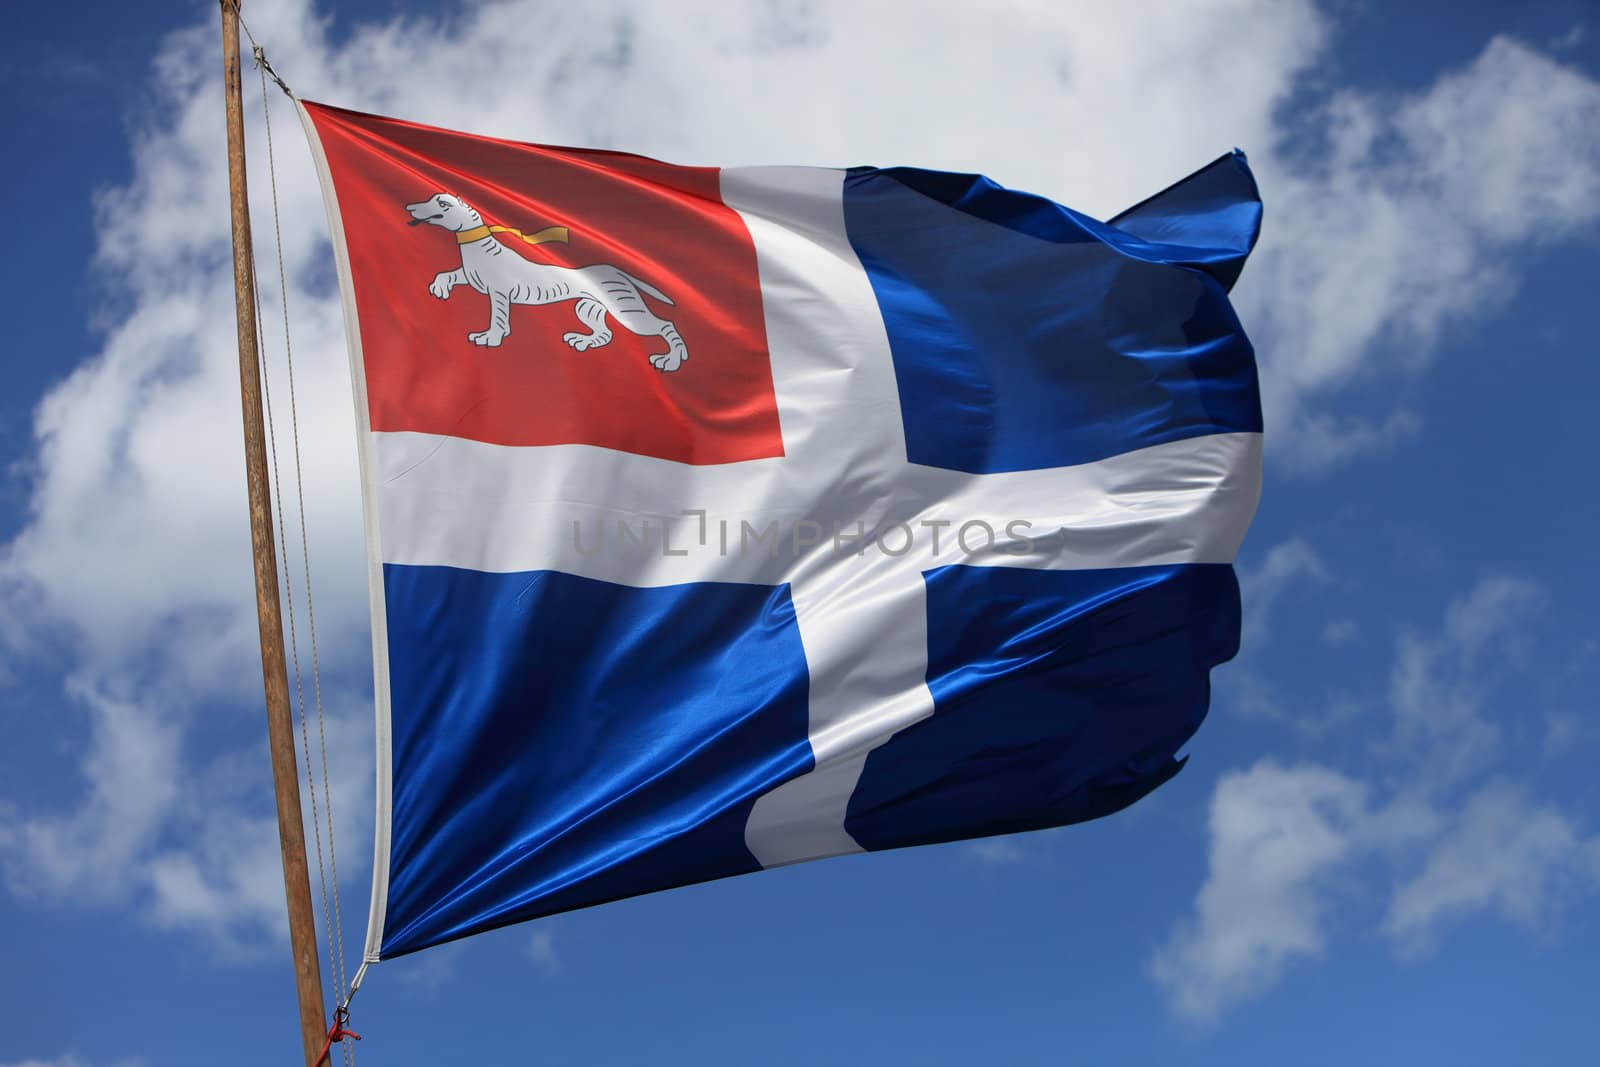 Image of a medieval flag in the wind against a white background.